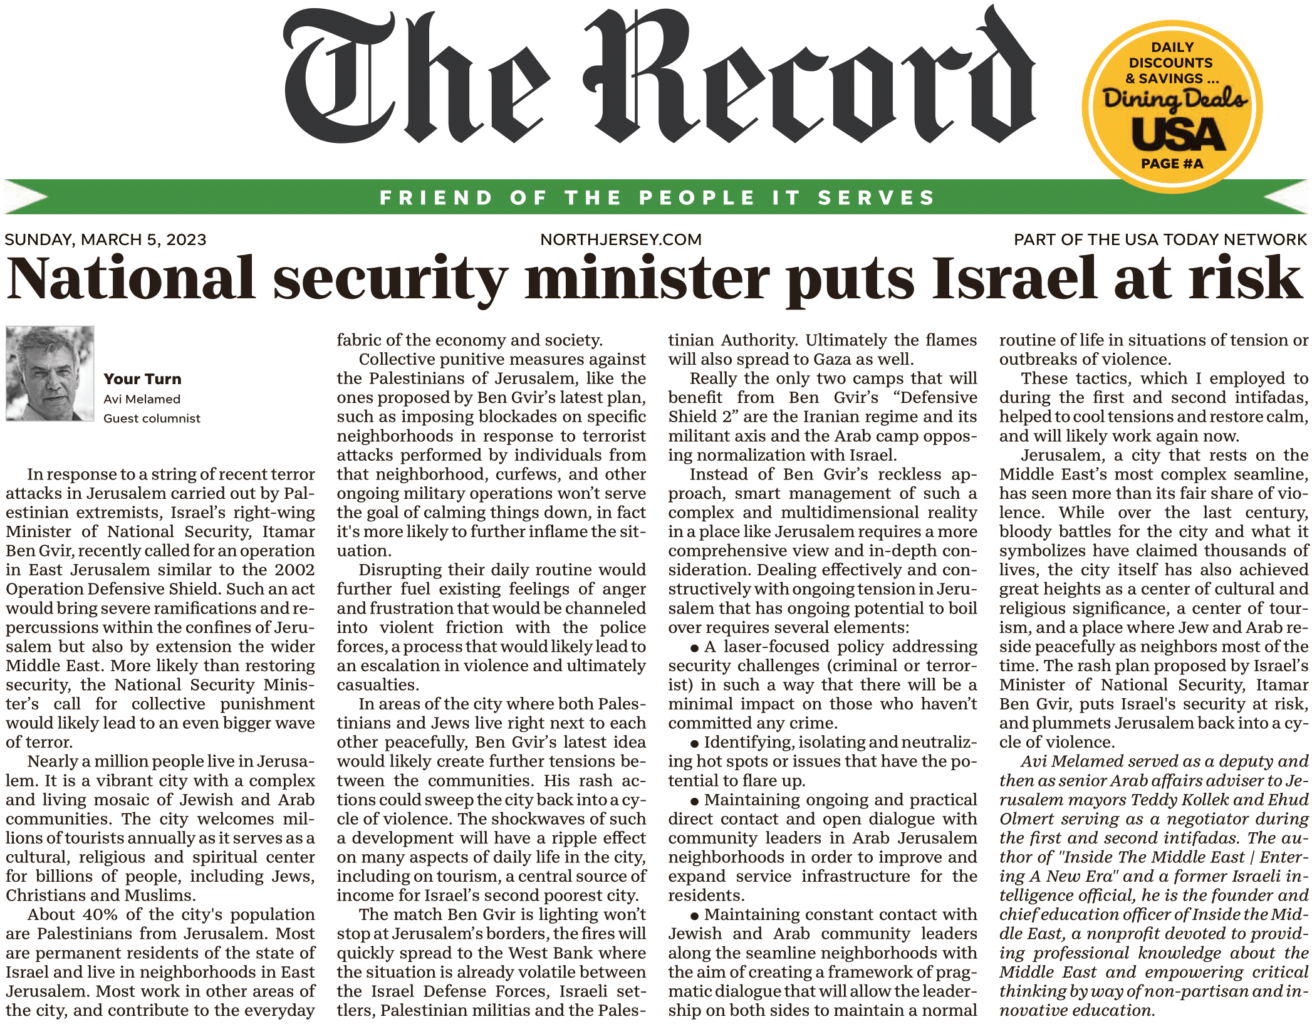 Israel ’s National Security Minister, Itamar Ben Gvir puts his country at risk Originally published in USA-Today - 2023-03-01 - Avi Melamed